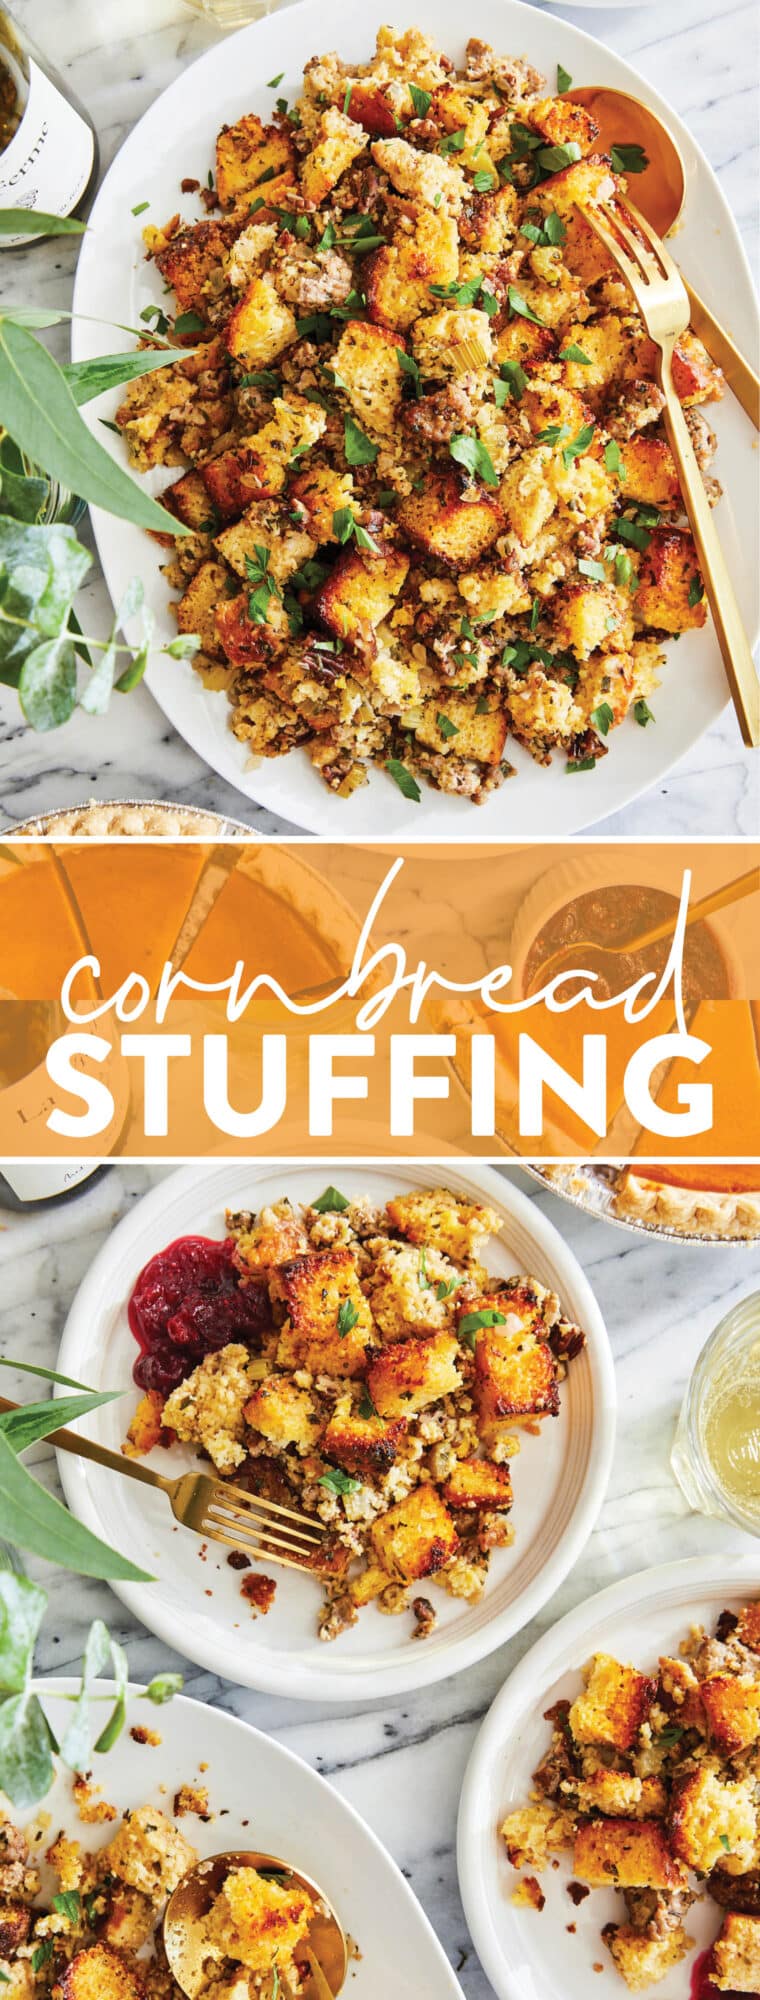 Cornbread Stuffing - Made with homemade cornbread, crumbled sausage, fresh sage and thyme. So crumbly and so good. Truly a family-favorite!